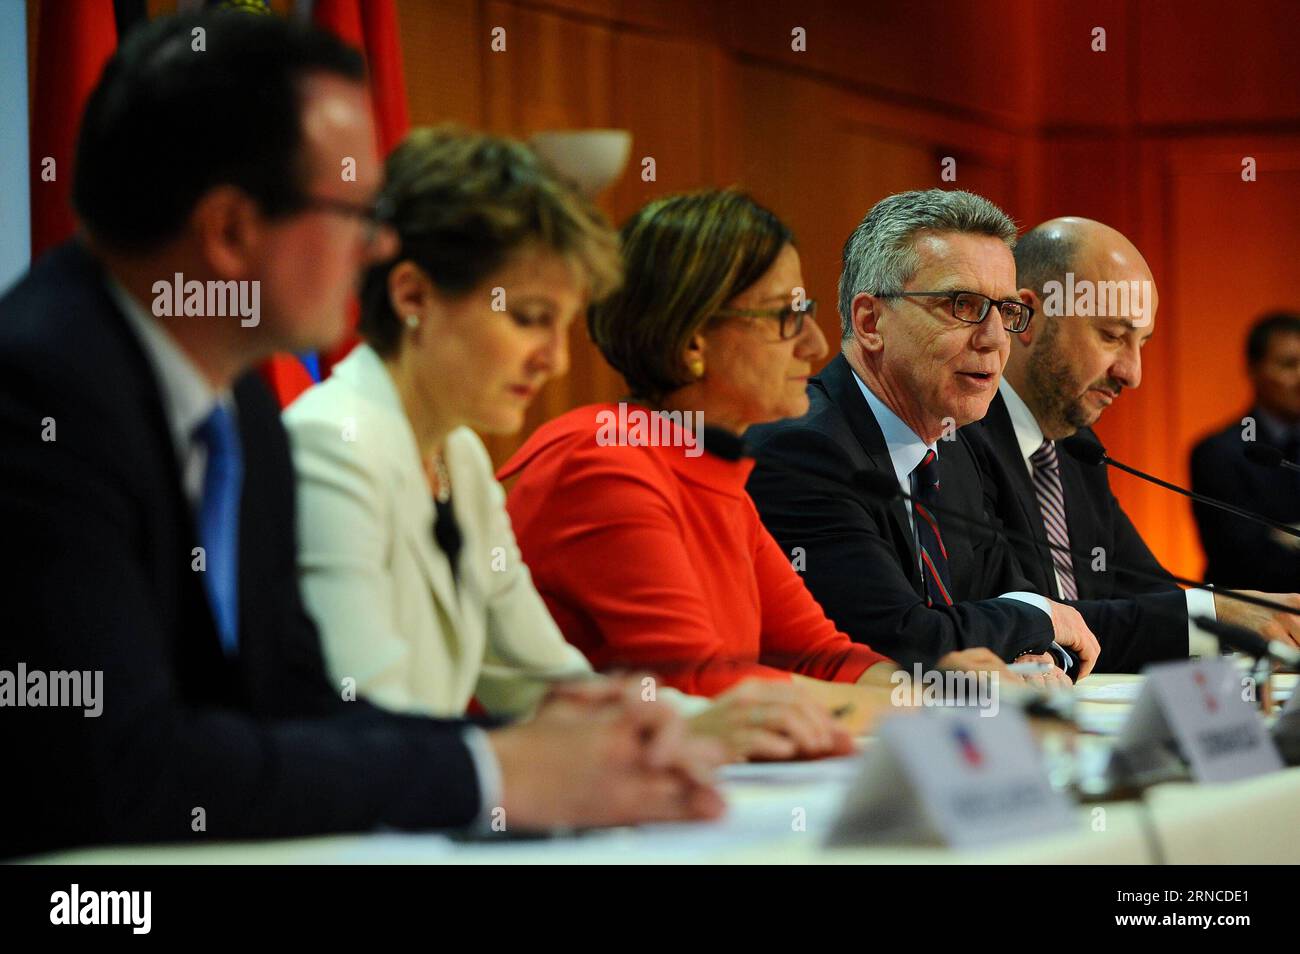 (160406) -- VIENNA, April 5, 2016 -- (L-R) Deputy Prime Minister of Liechtenstein Thomas Zwiefelhofer, Swiss Justice Minister Simonetta Sommaruga, Austrian Interior Minister Johanna Mikl-Leitner, German Interior Minister Thomas de Maiziere and Luxembourg Minister of Interior Security Etienne Schneider attend a press conference after a meeting in Vienna, Austria, April 5, 2016. The officials held a meeting in Vienna on Tuesday to discuss issues related to refugees. ) (cl) AUSTRIA-VIENNA-MEETING QianxYi PUBLICATIONxNOTxINxCHN   Vienna April 5 2016 l r Deputy Prime Ministers of Liechtenstein Thom Stock Photo